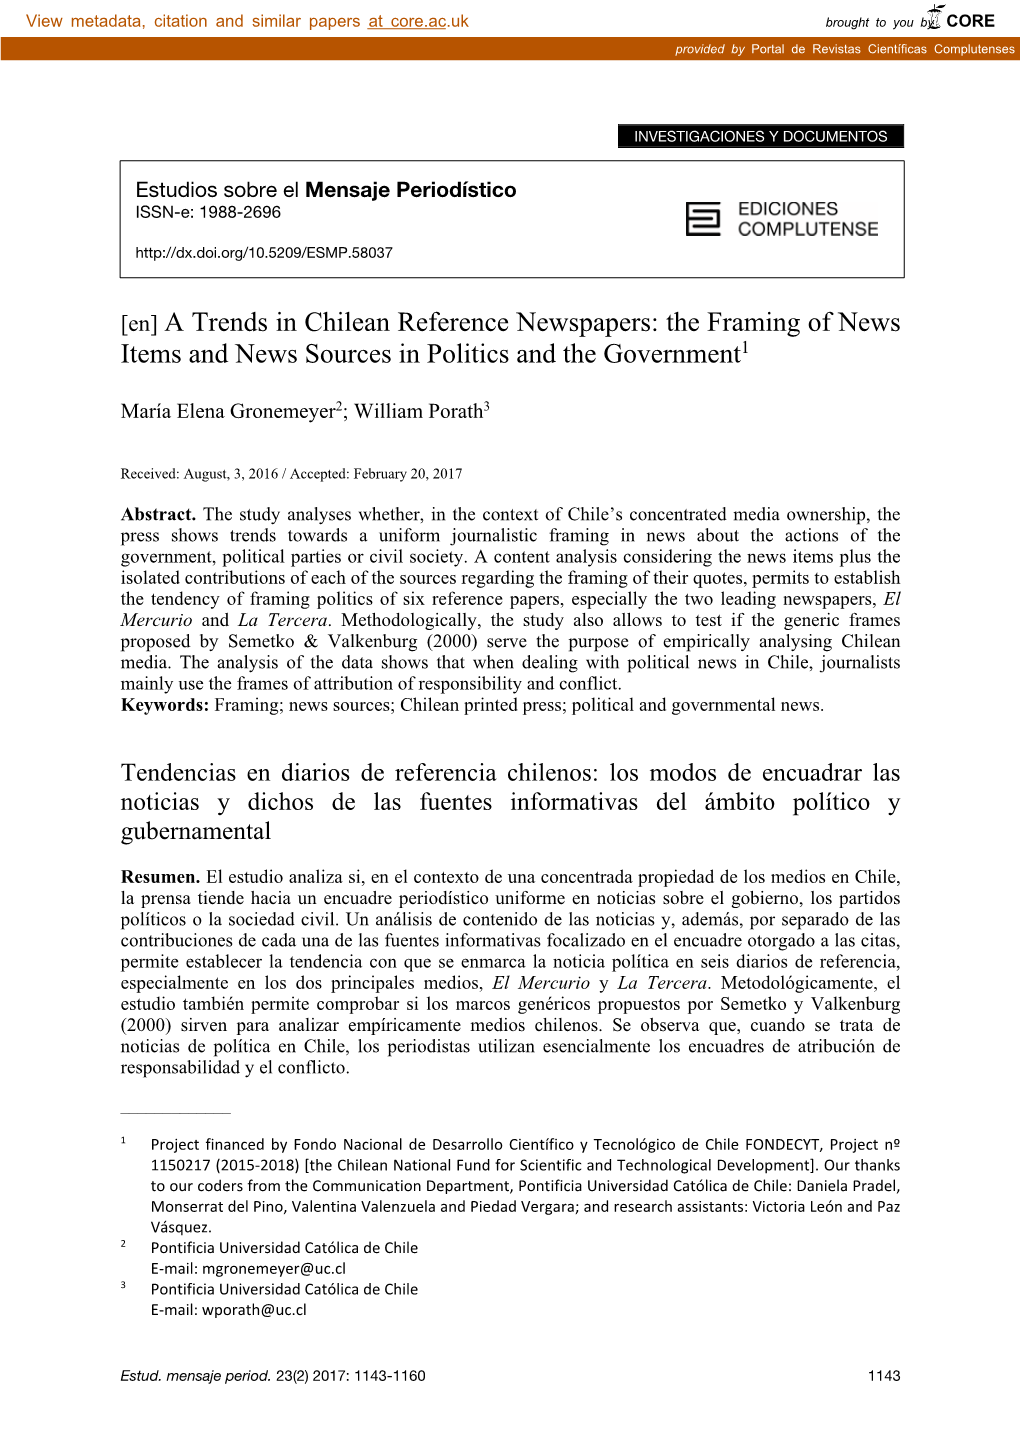 A Trends in Chilean Reference Newspapers: the Framing of News Items and News Sources in Politics and the Government1